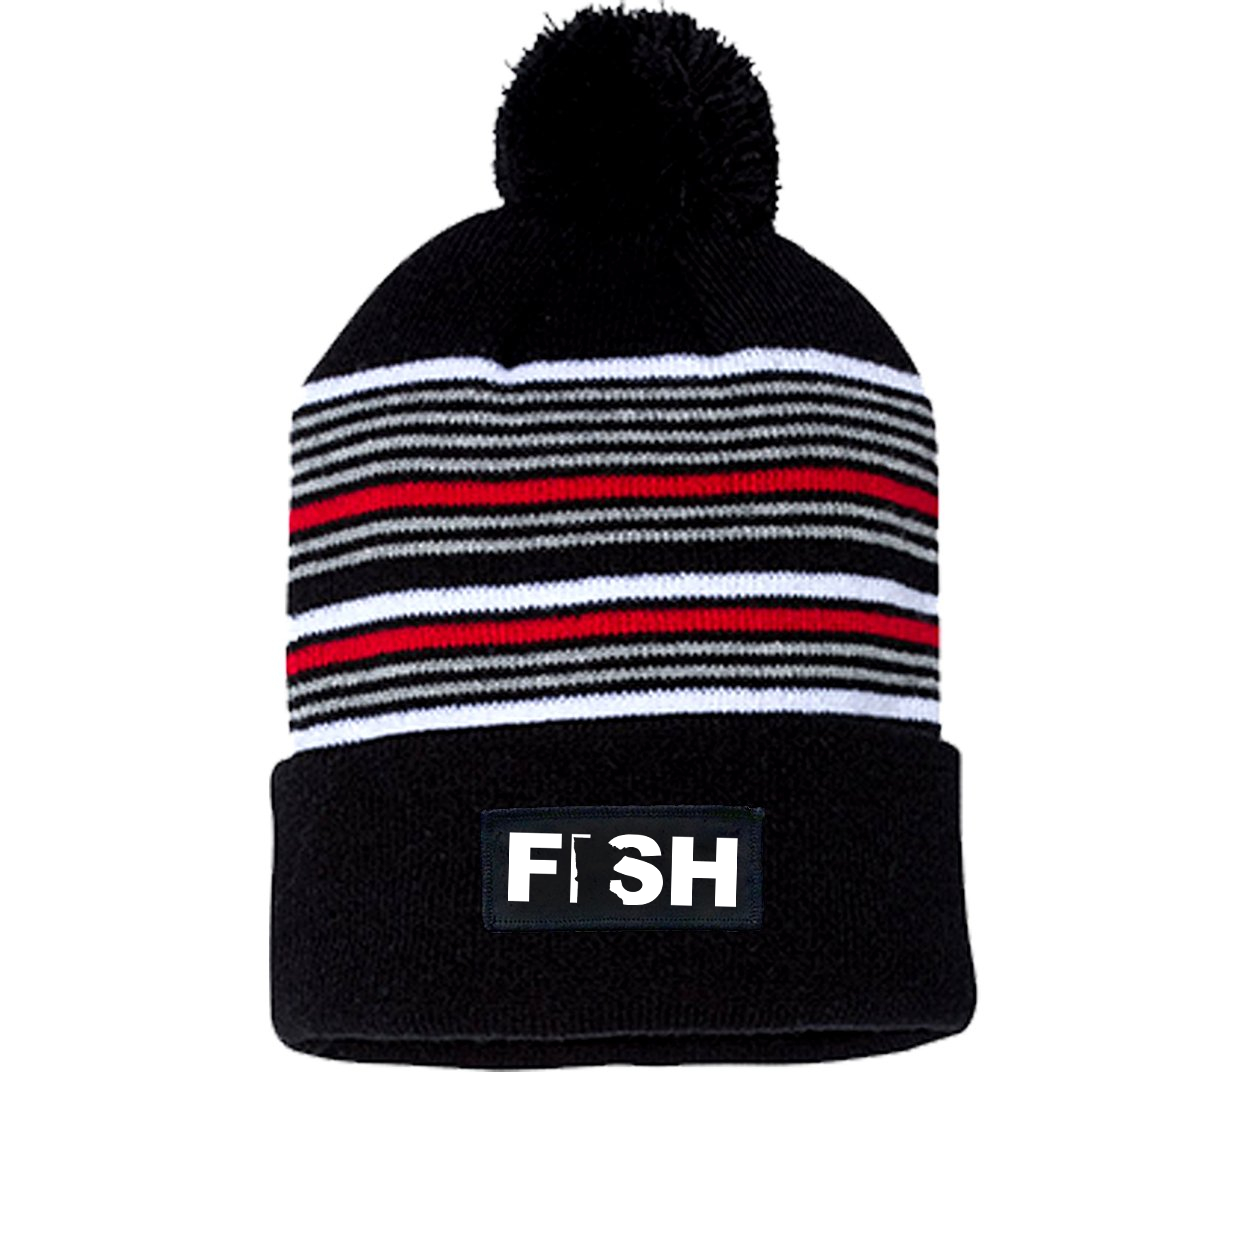 Fish Minnesota Night Out Woven Patch Roll Up Pom Knit Beanie Black/ White/ Grey/ Red Beanie (White Logo)